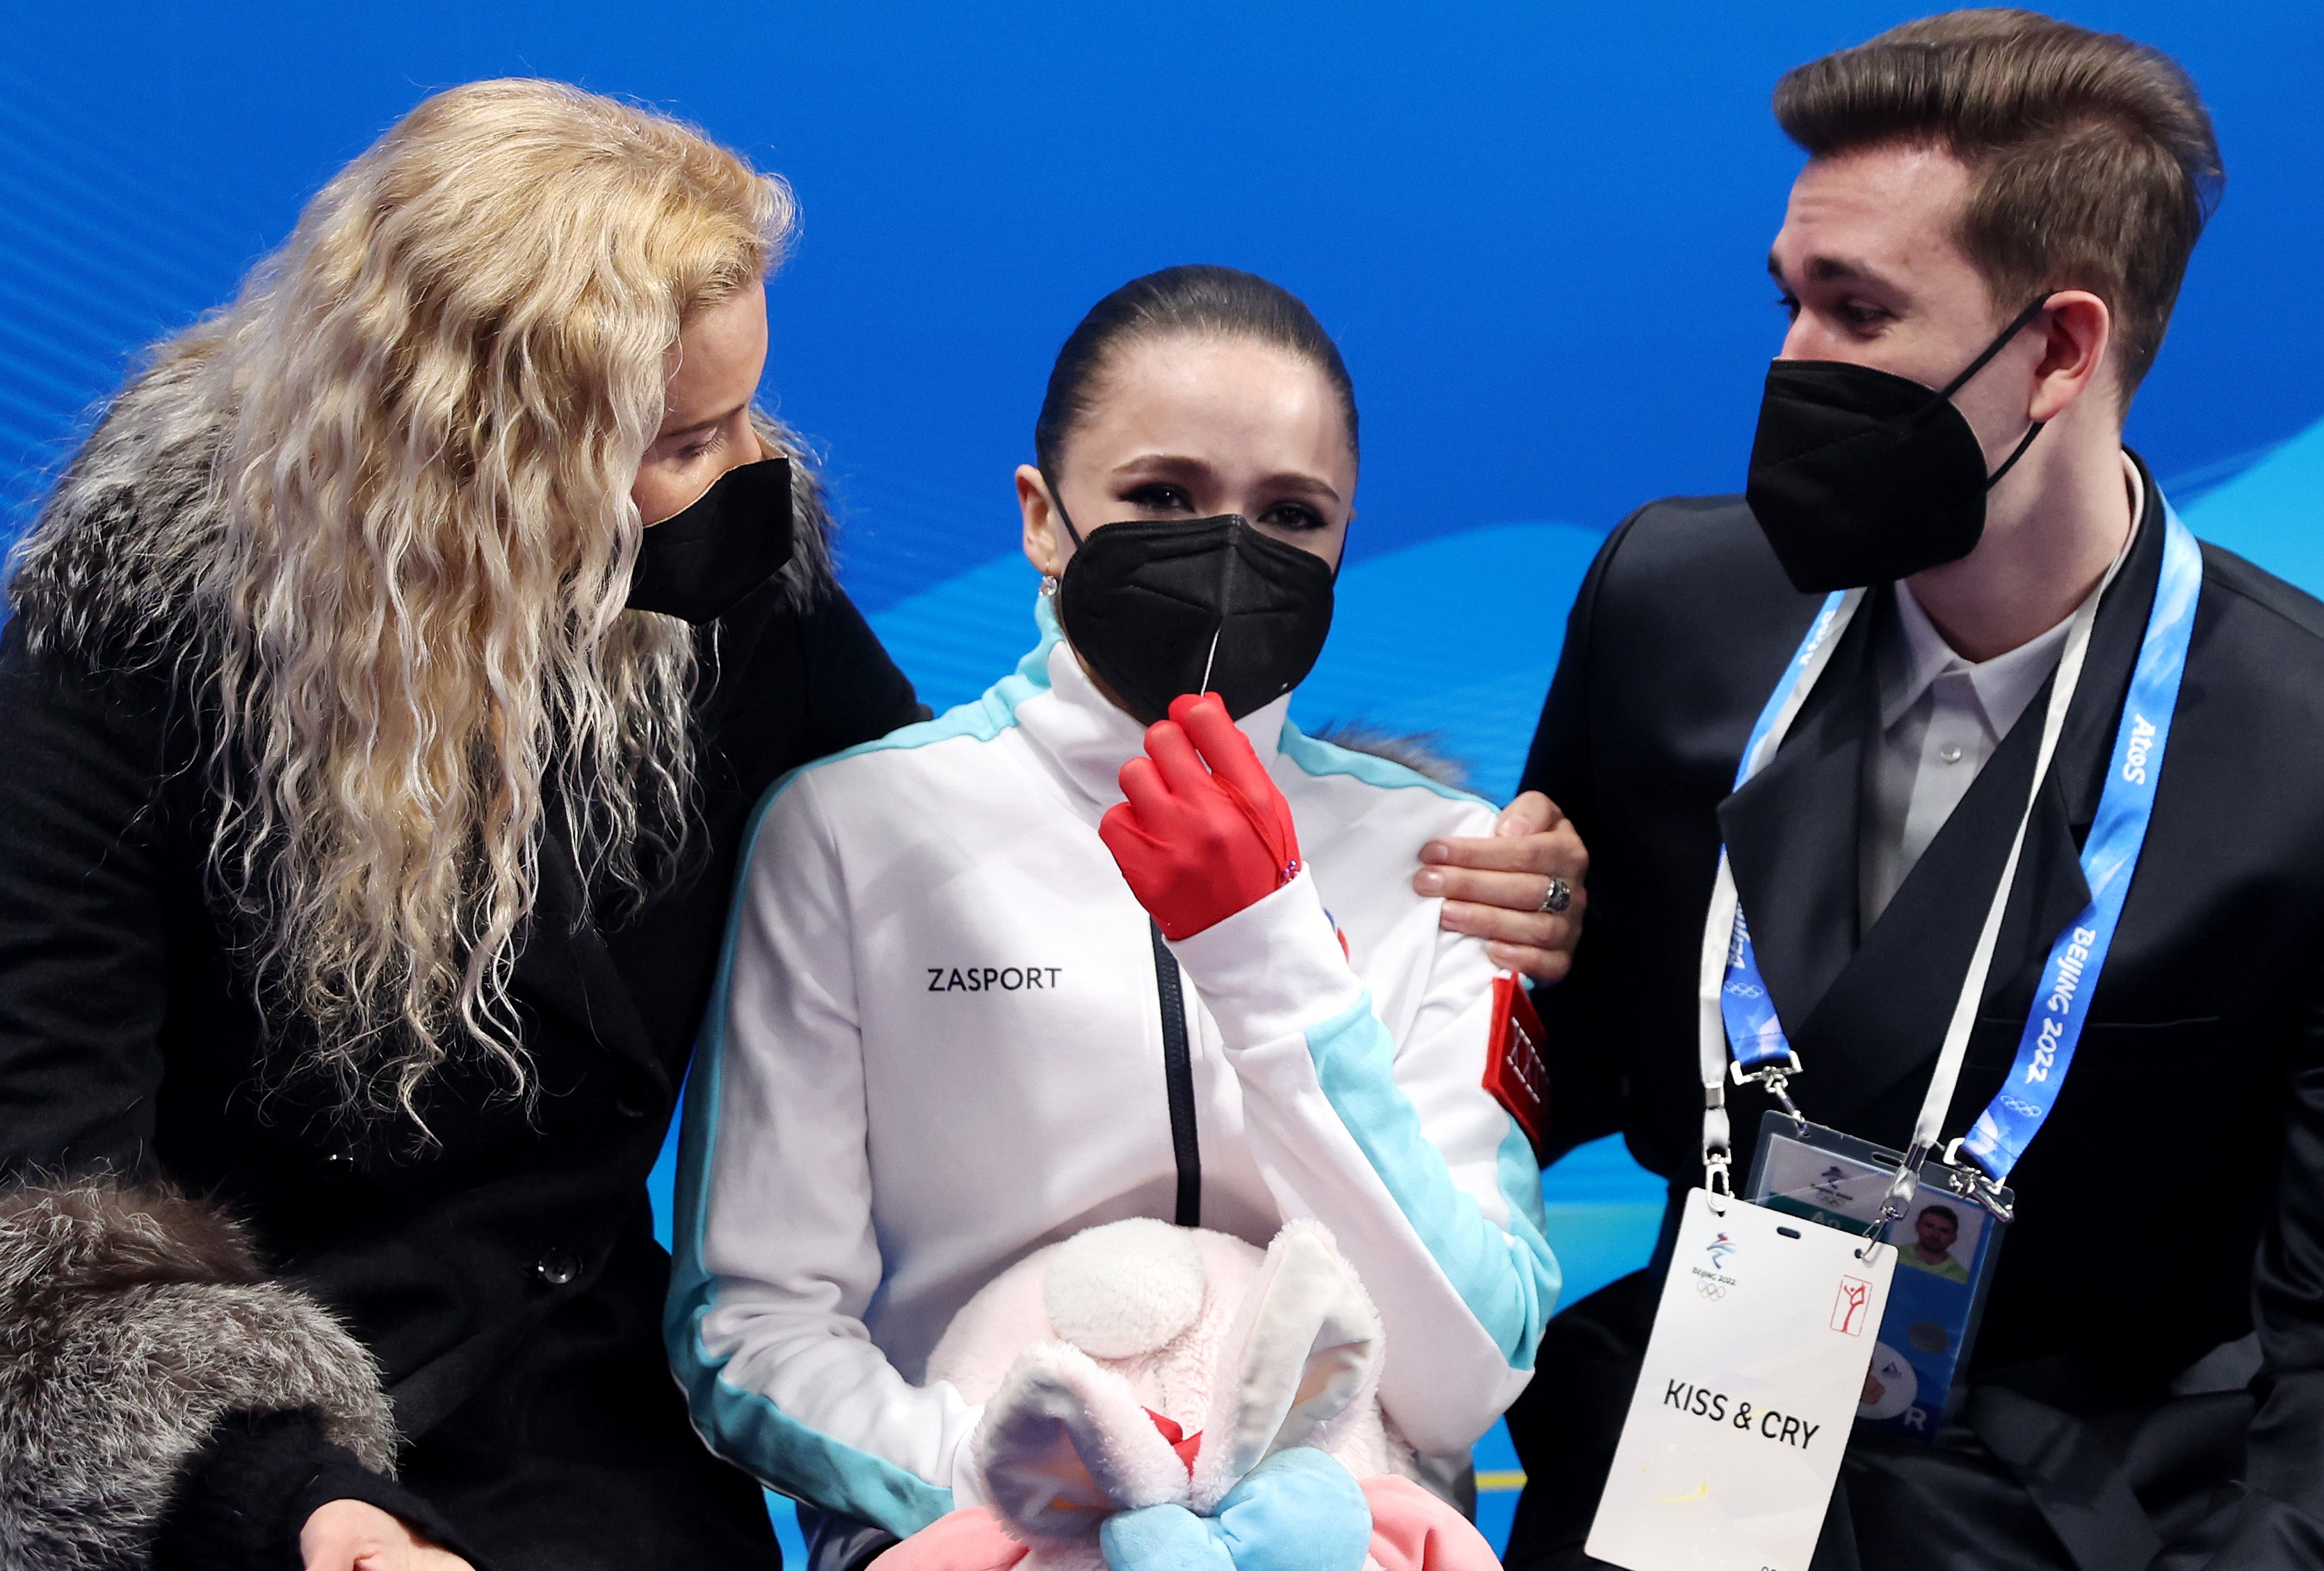 Kamila Valieva was the story of the Games - but it left a bad taste